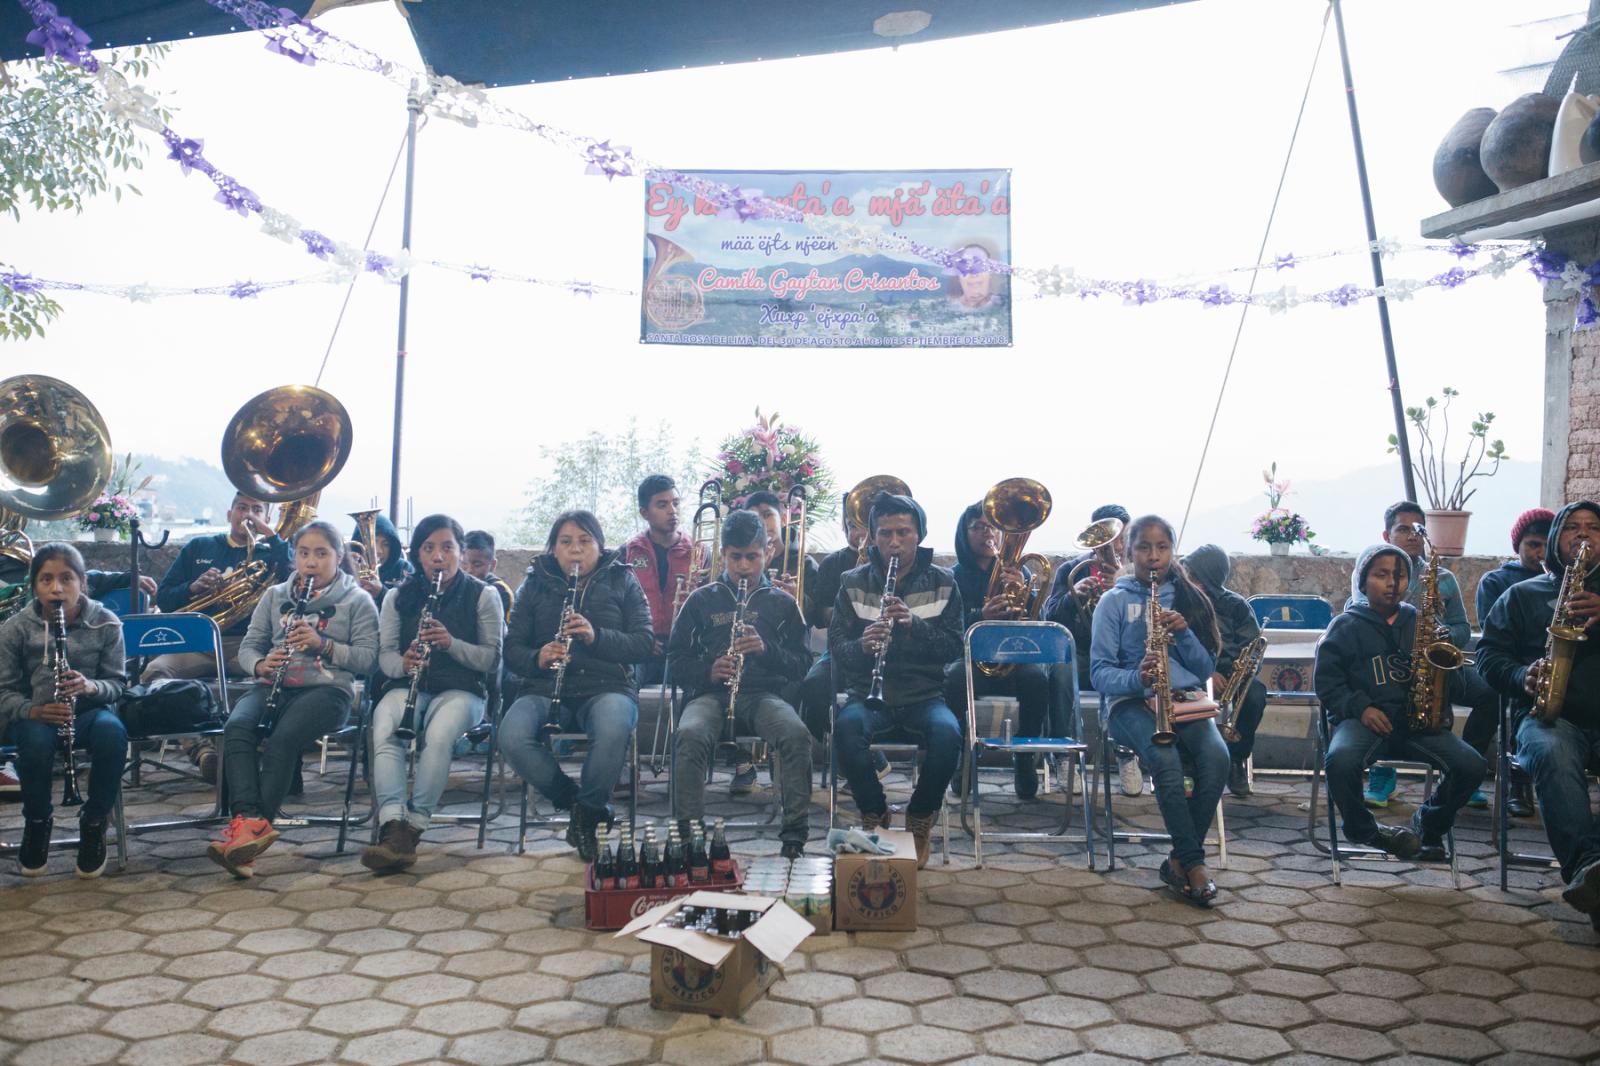 Image from Basketball in the Sierra Norte of Oaxaca - A philharmonic band from a neighboring Mixe town plays in...